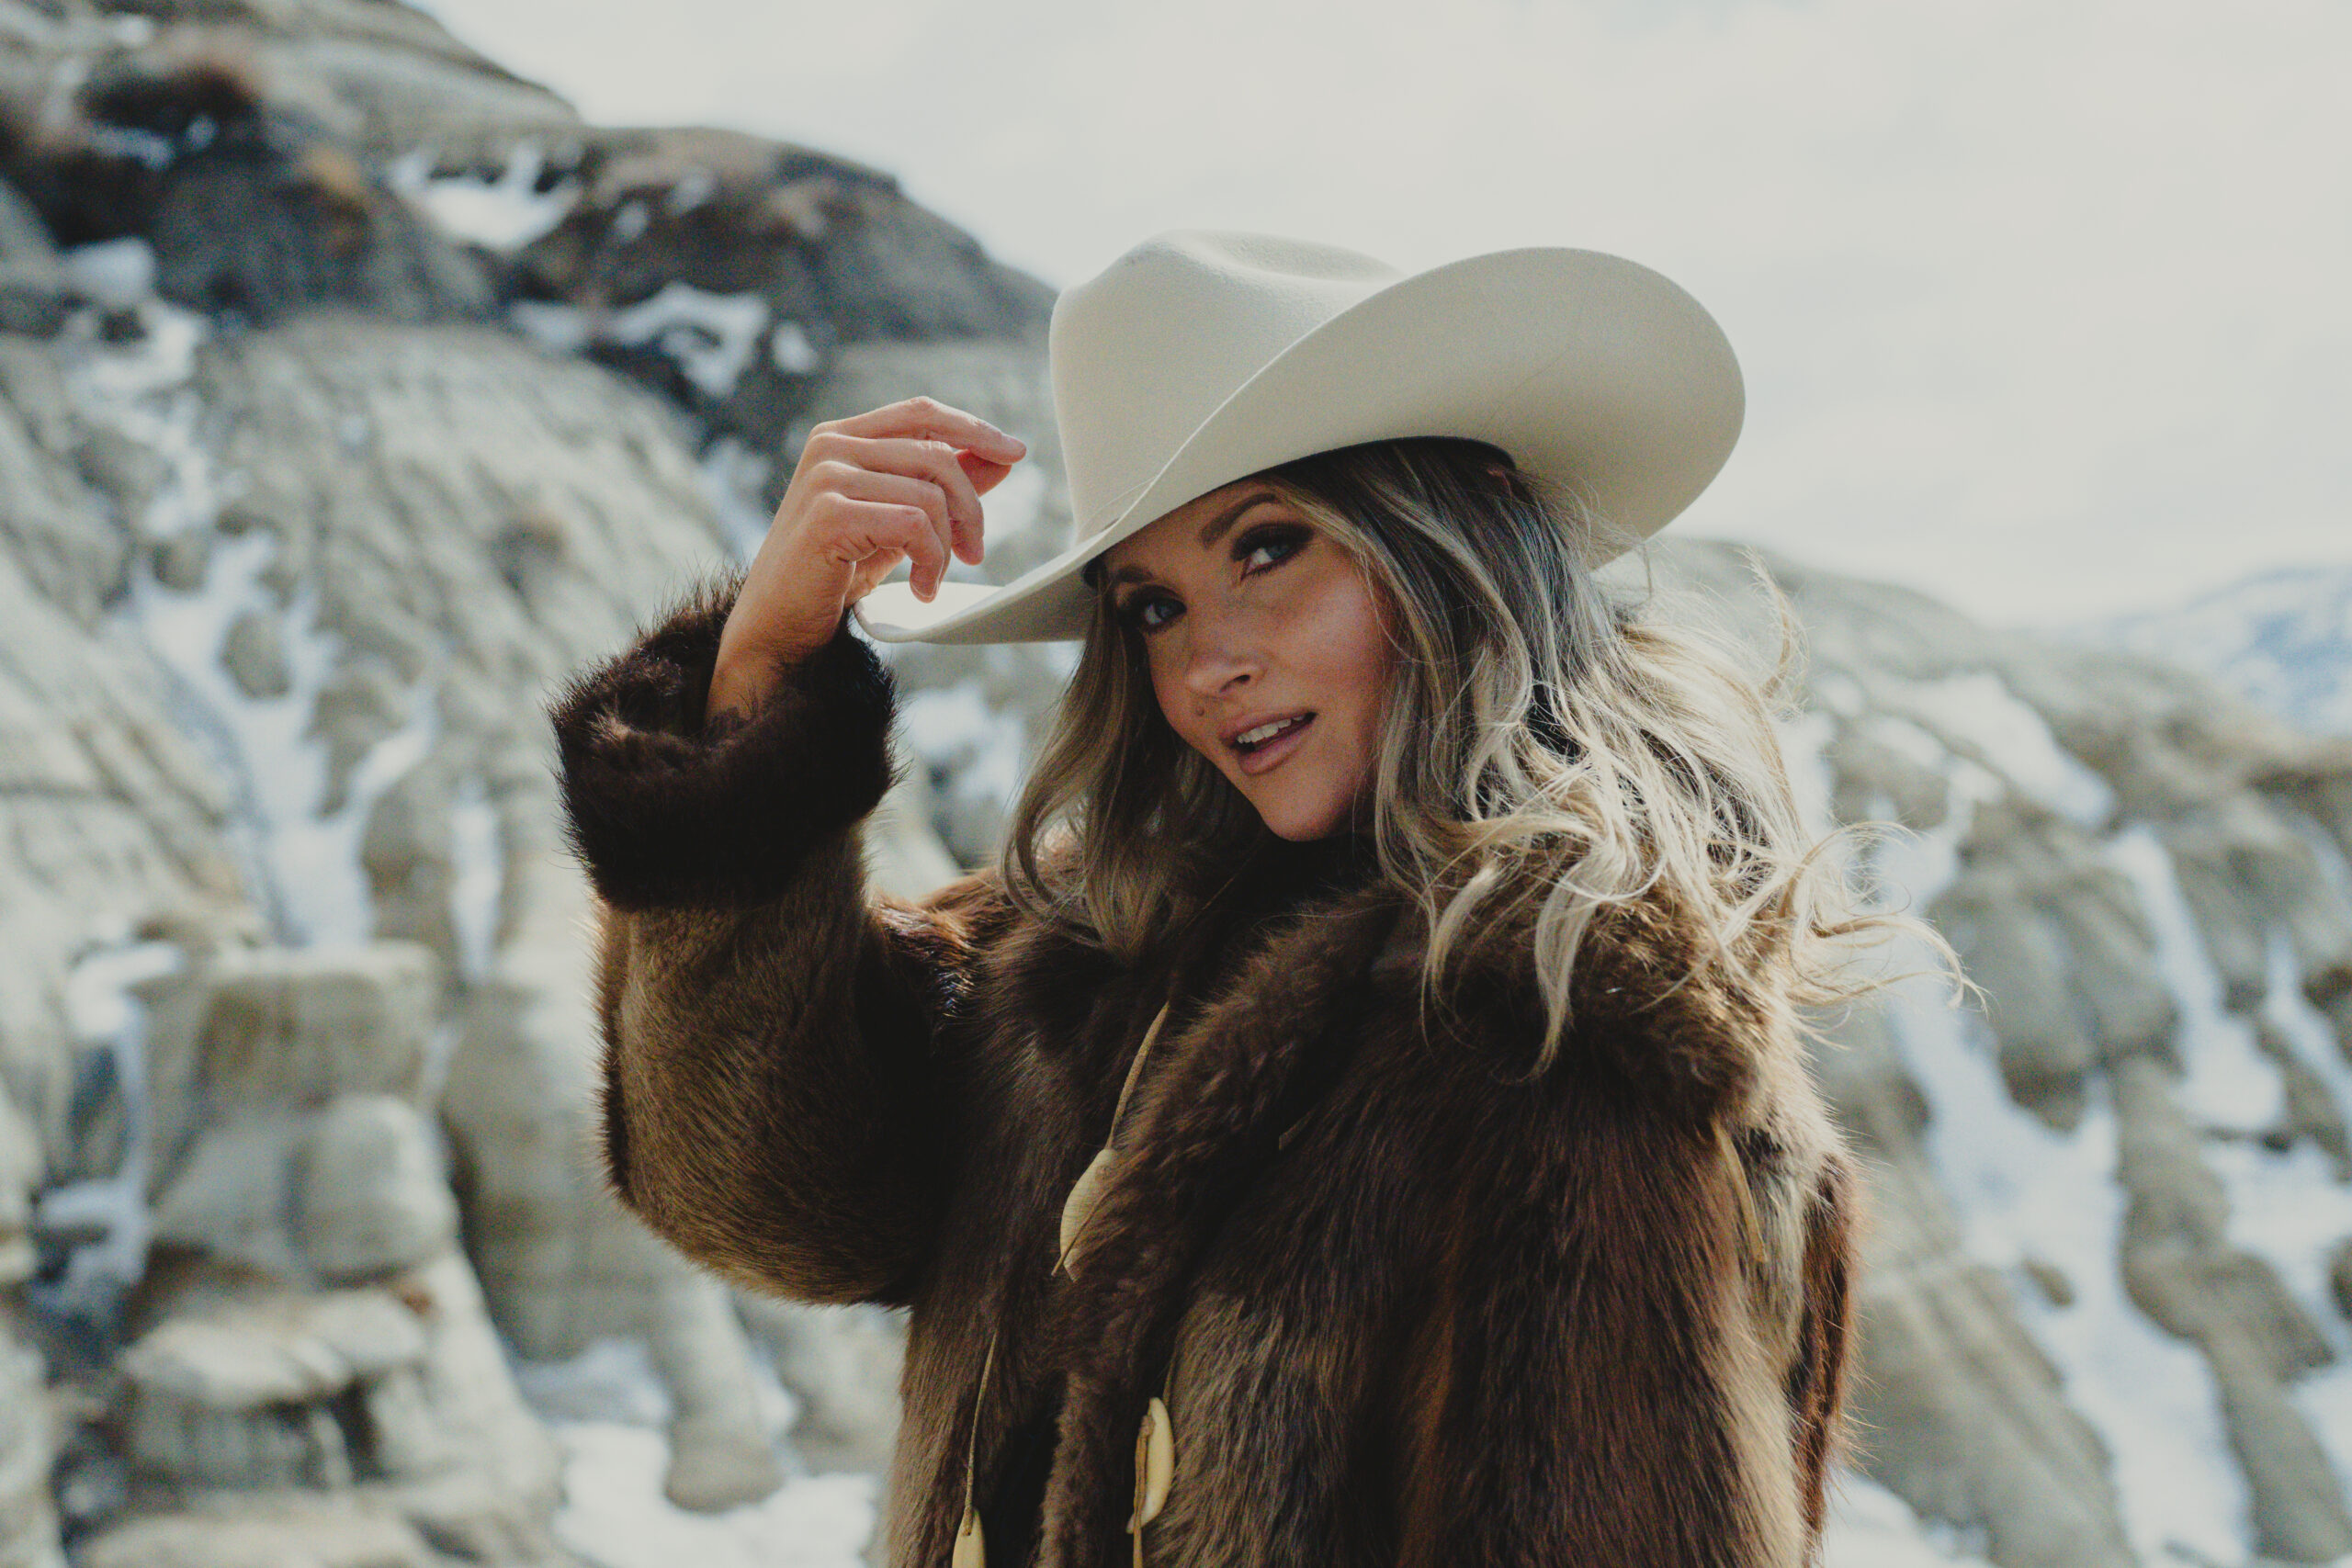 Kalsey Kulyk Takes Listeners On An Old School Western Journey with New Album “Outlaw Poetry” (Listen)